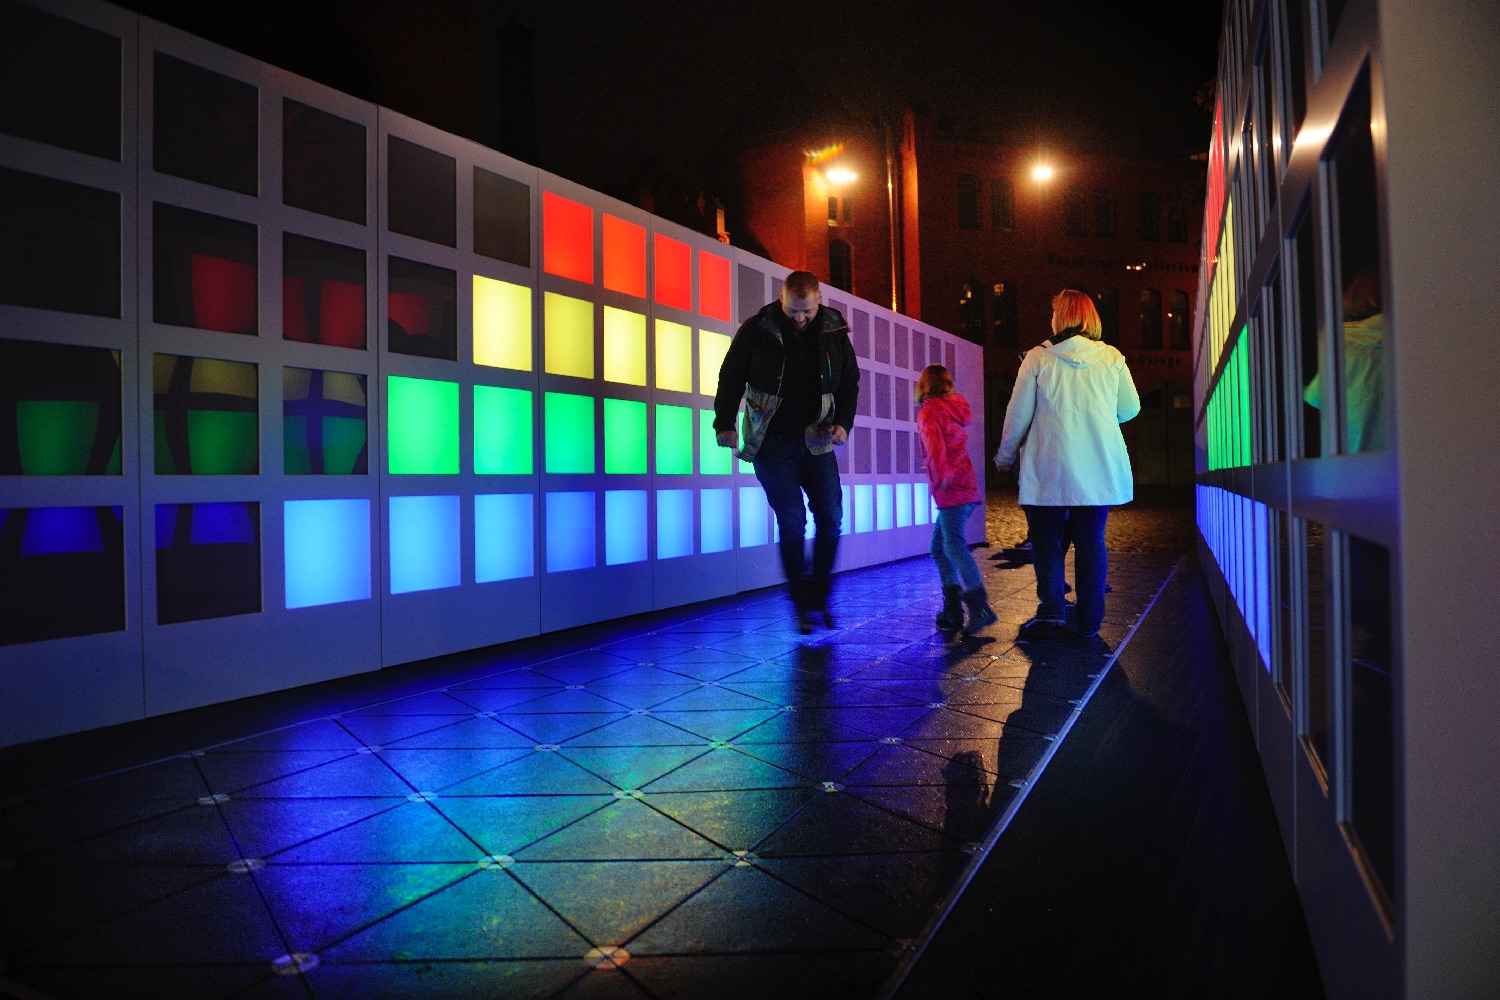 energy harvesting walkway berlin google and uk clean tech business pavegen unveil the largest ever at festival of lights 1